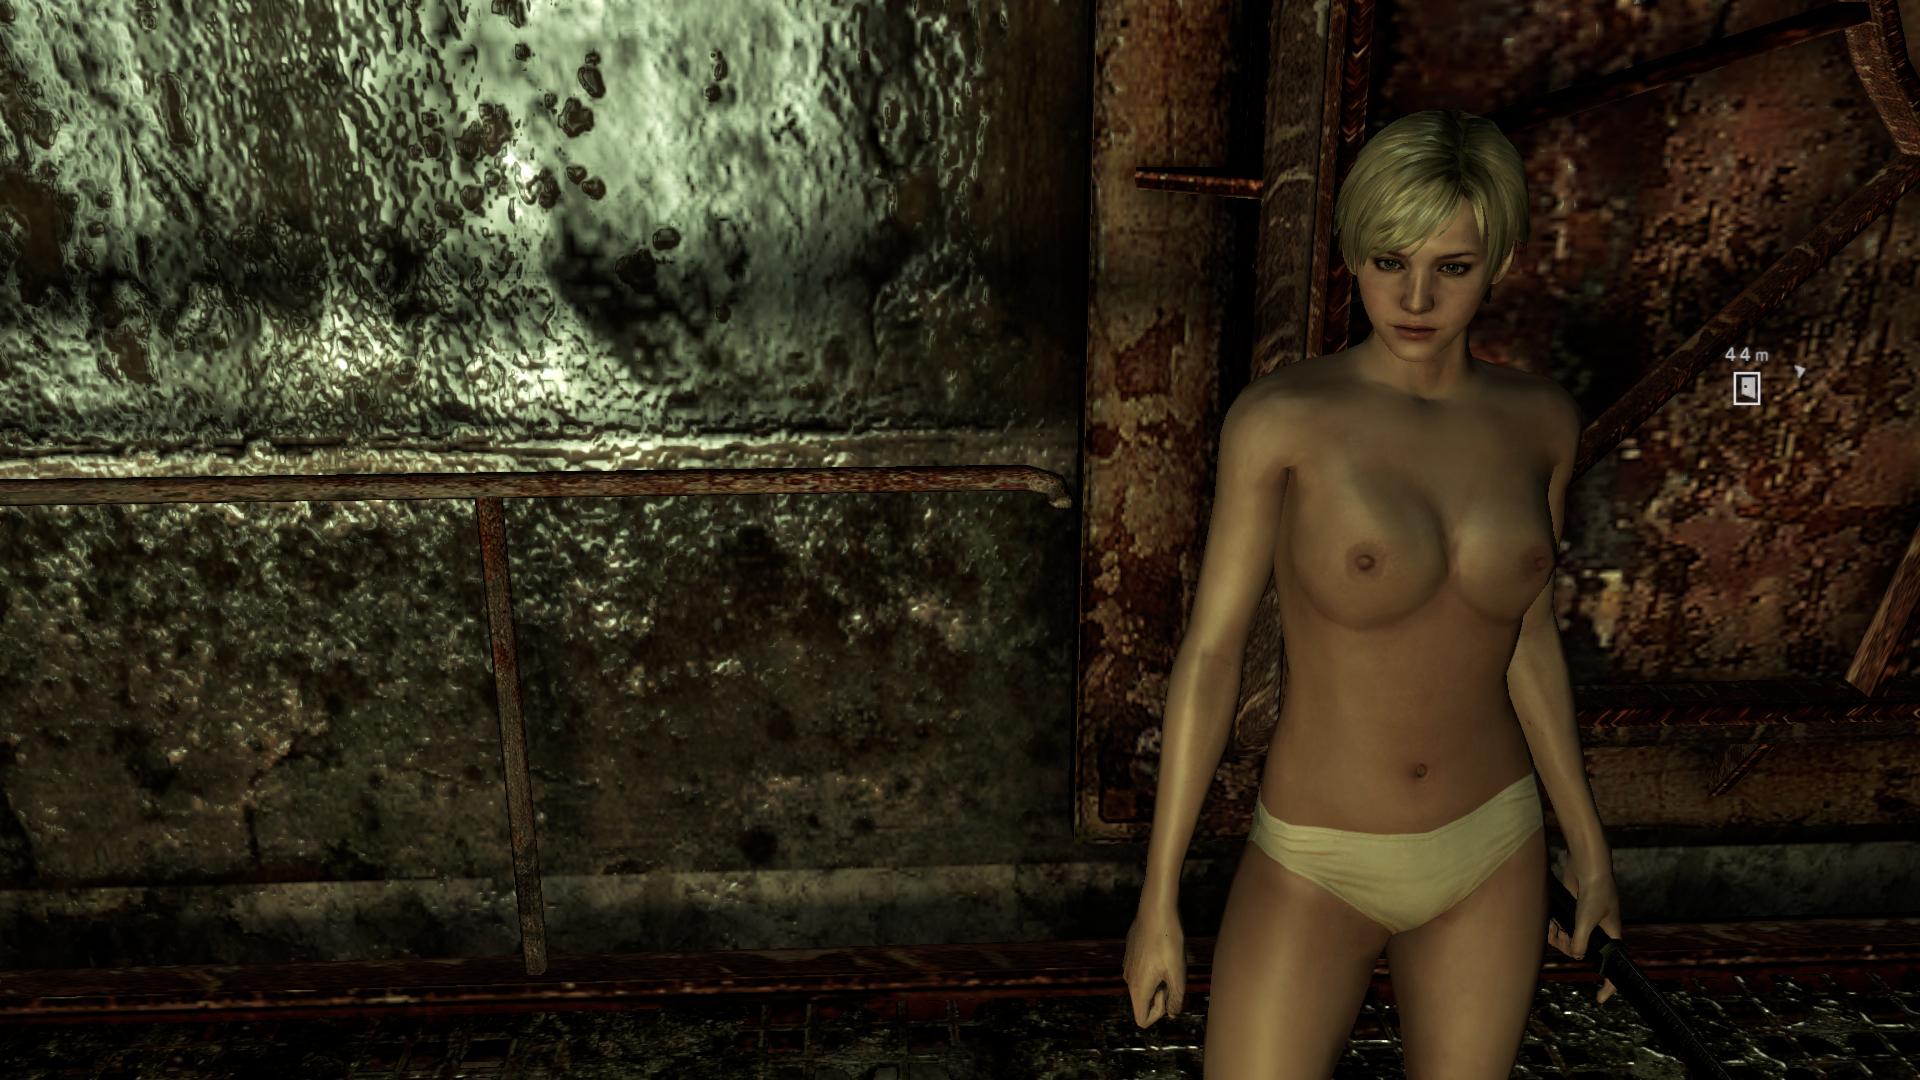 Resident Evil 6 with nude mod, Sherry topless.